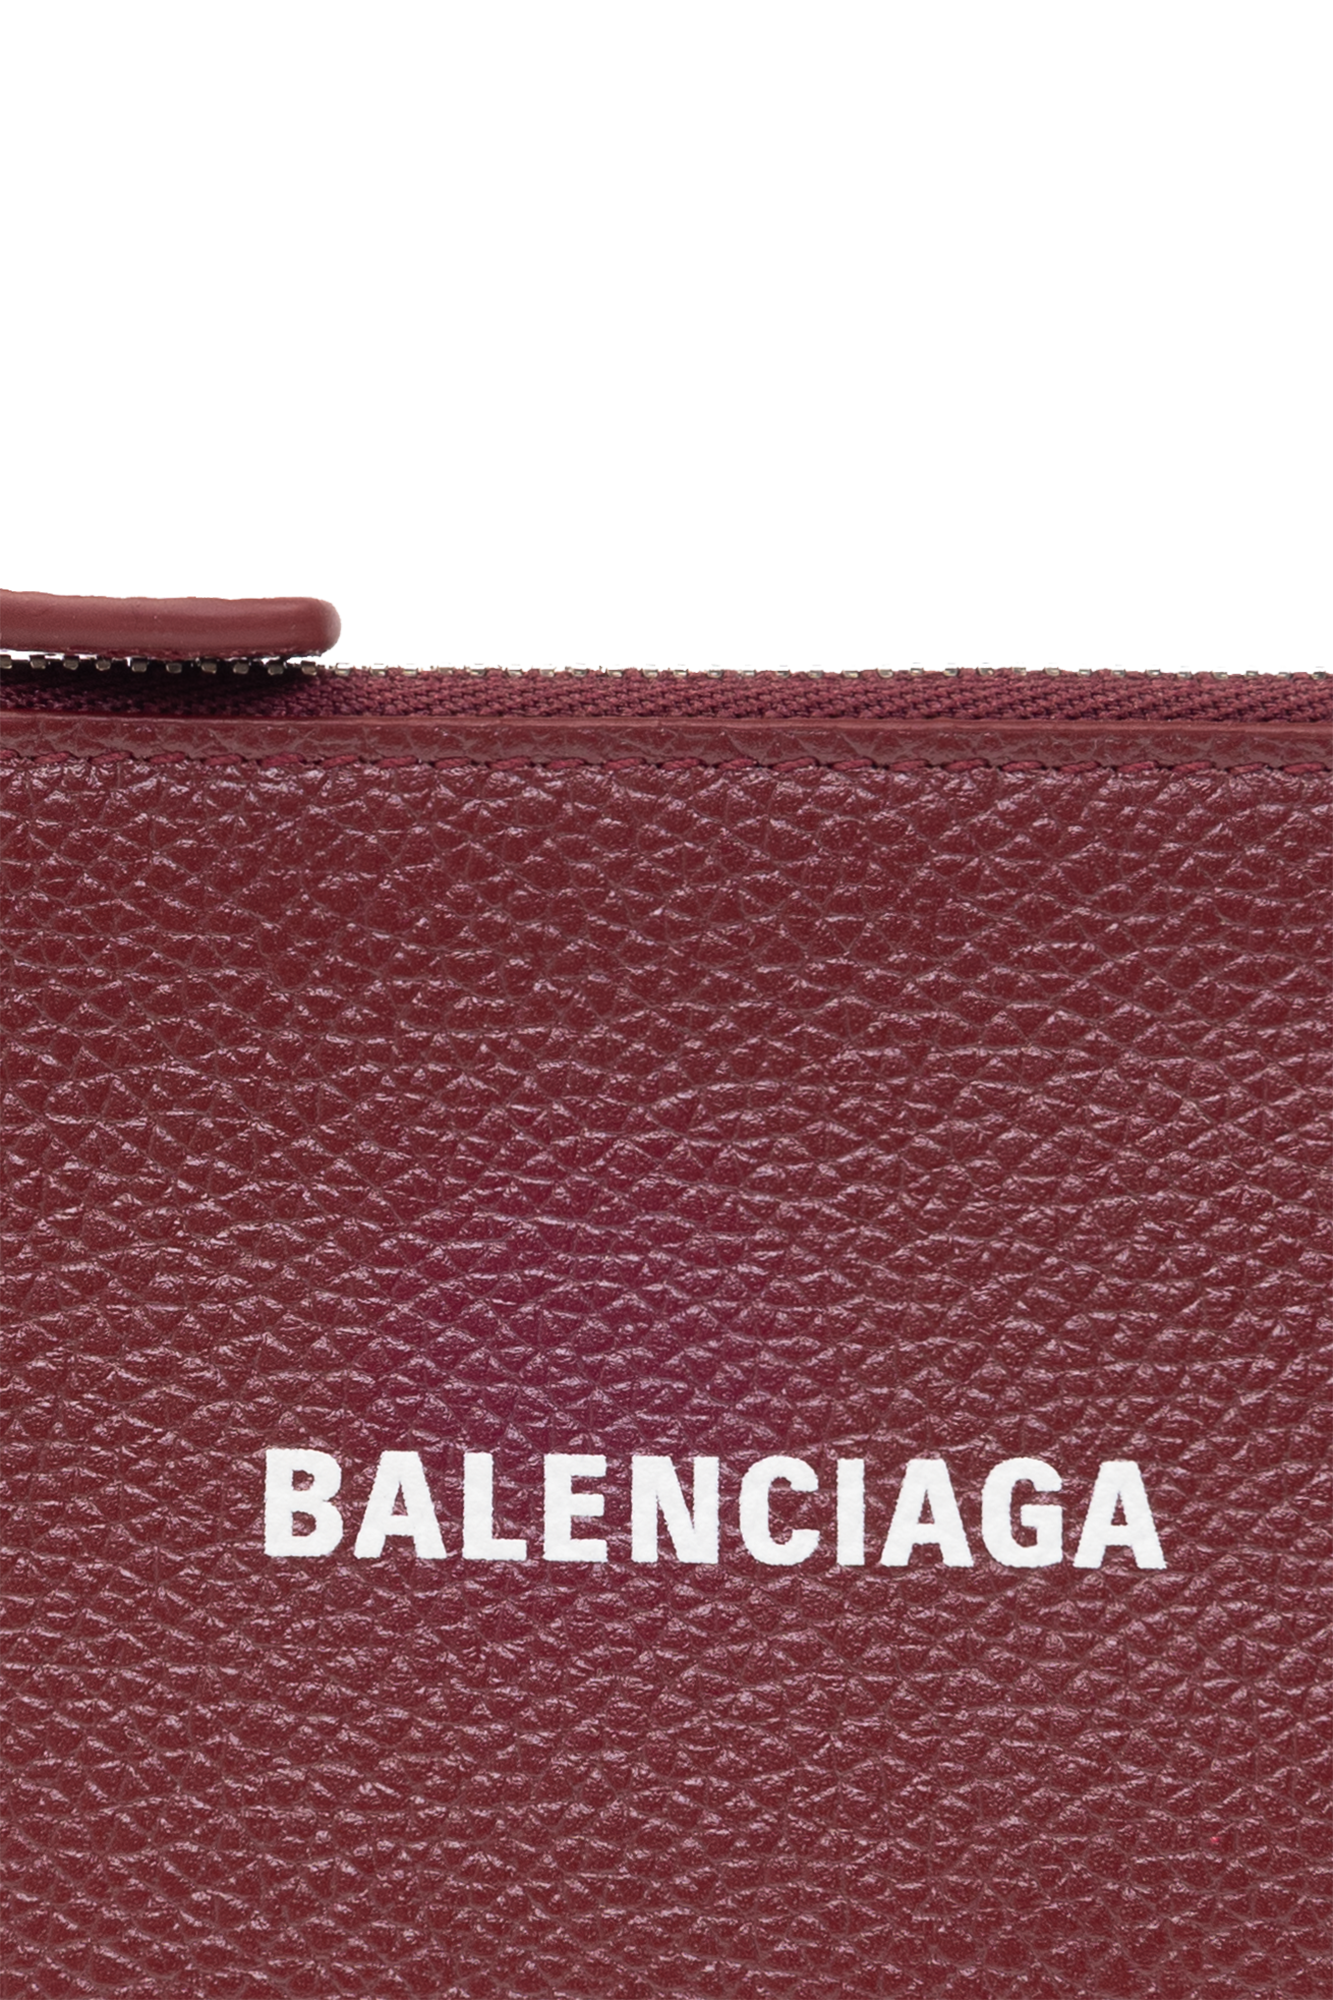 Balenciaga If the table does not fit on your screen, you can scroll to the right